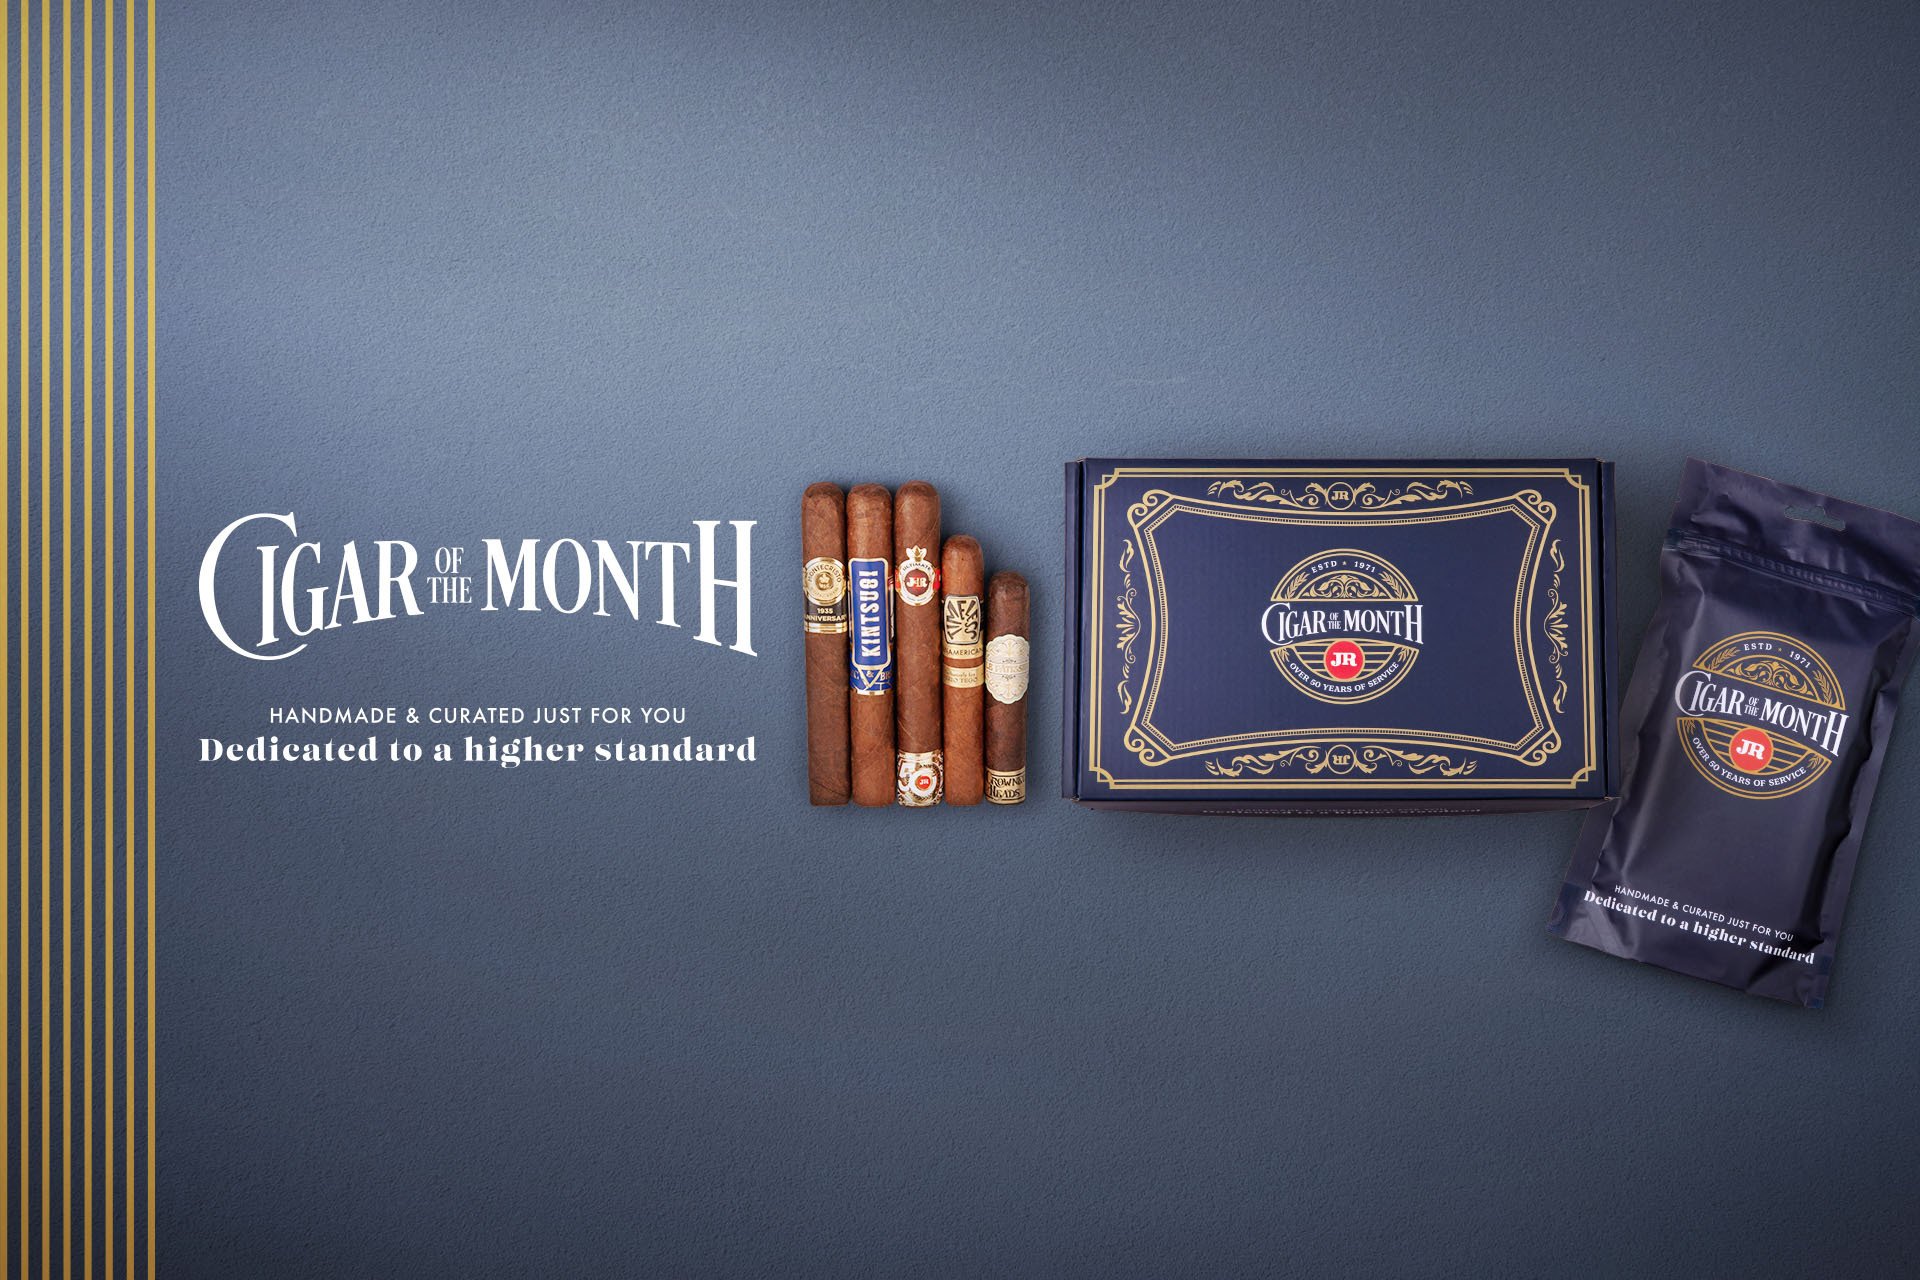 image of cigar of the month box and pa ck